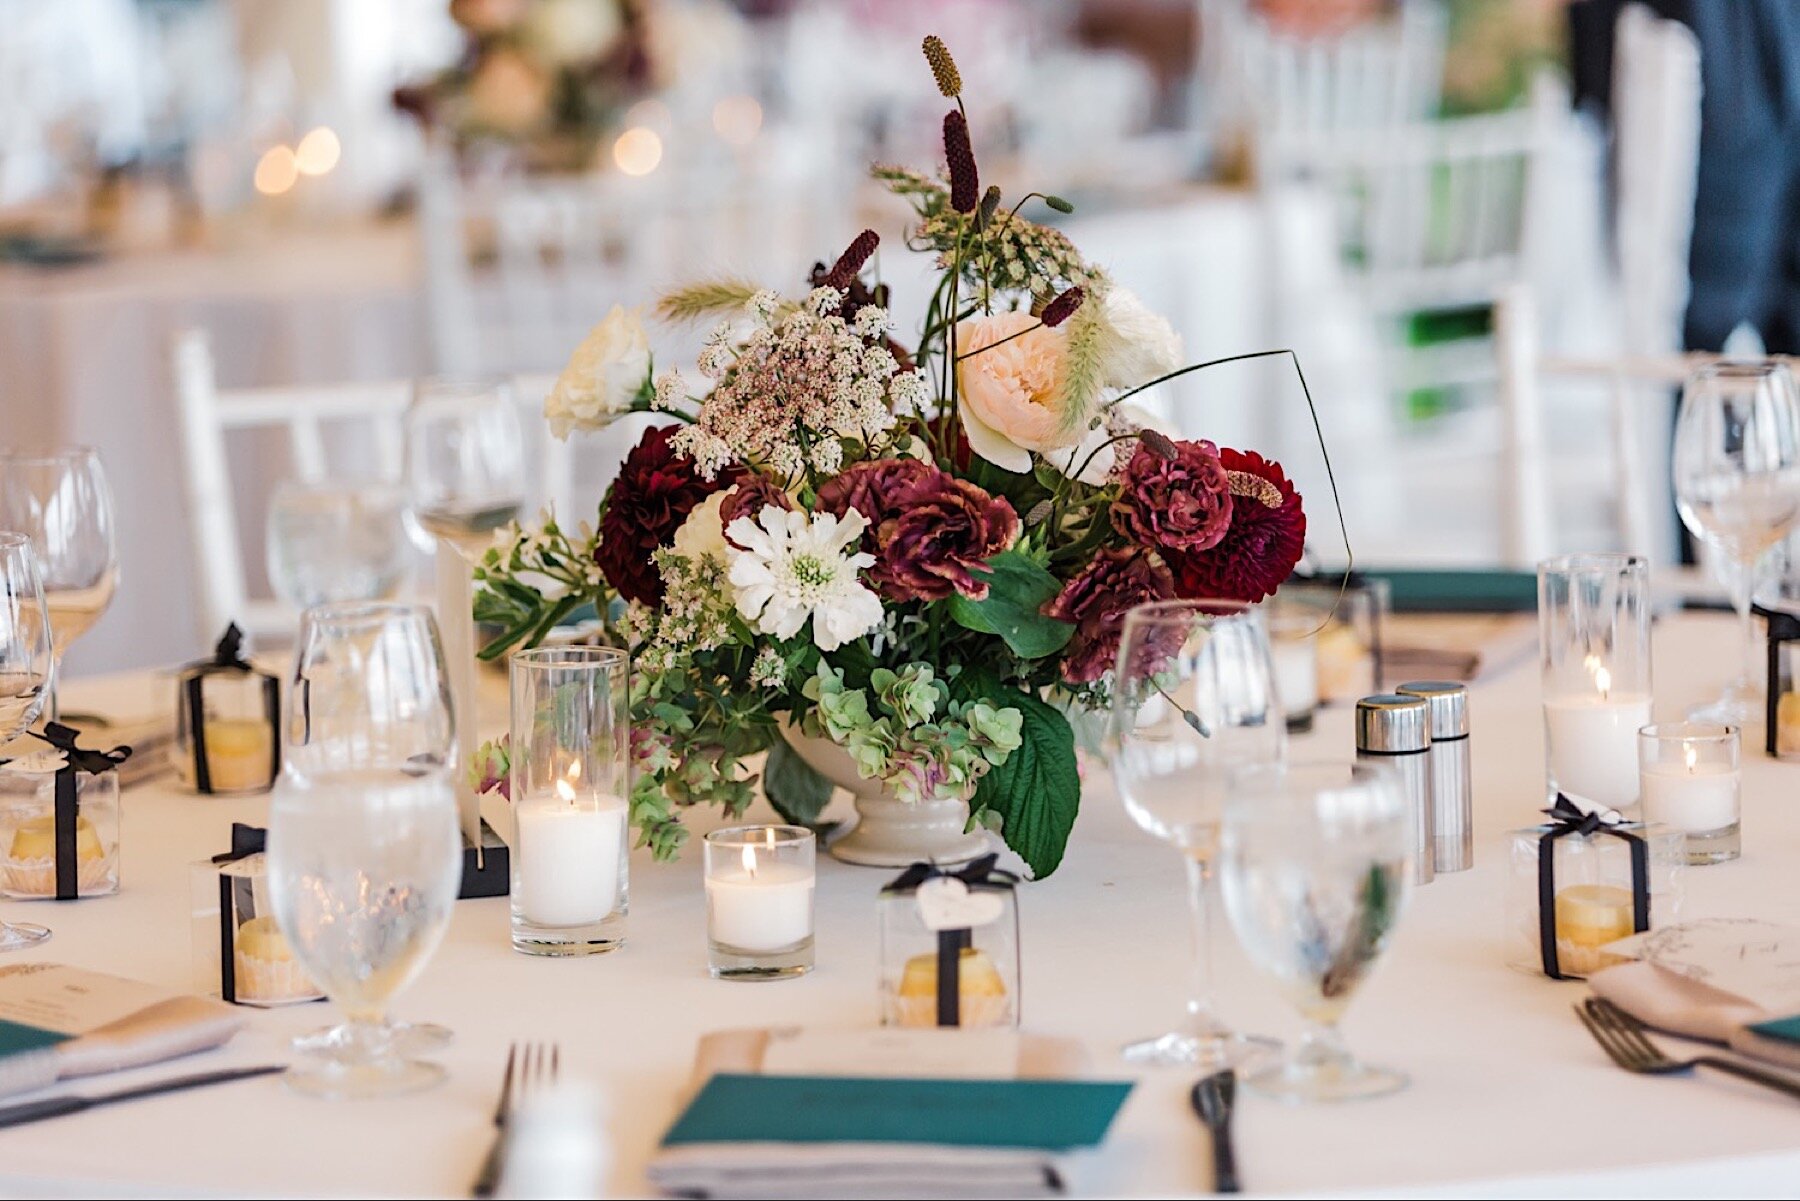 18_shaxton-ngo-443_A_Woodmark_floral_top_with_Florist_Gather_Design_from_Company_at_romantic_the_wedding_lush_Seattle_Wedding_design_Hotel.jpg